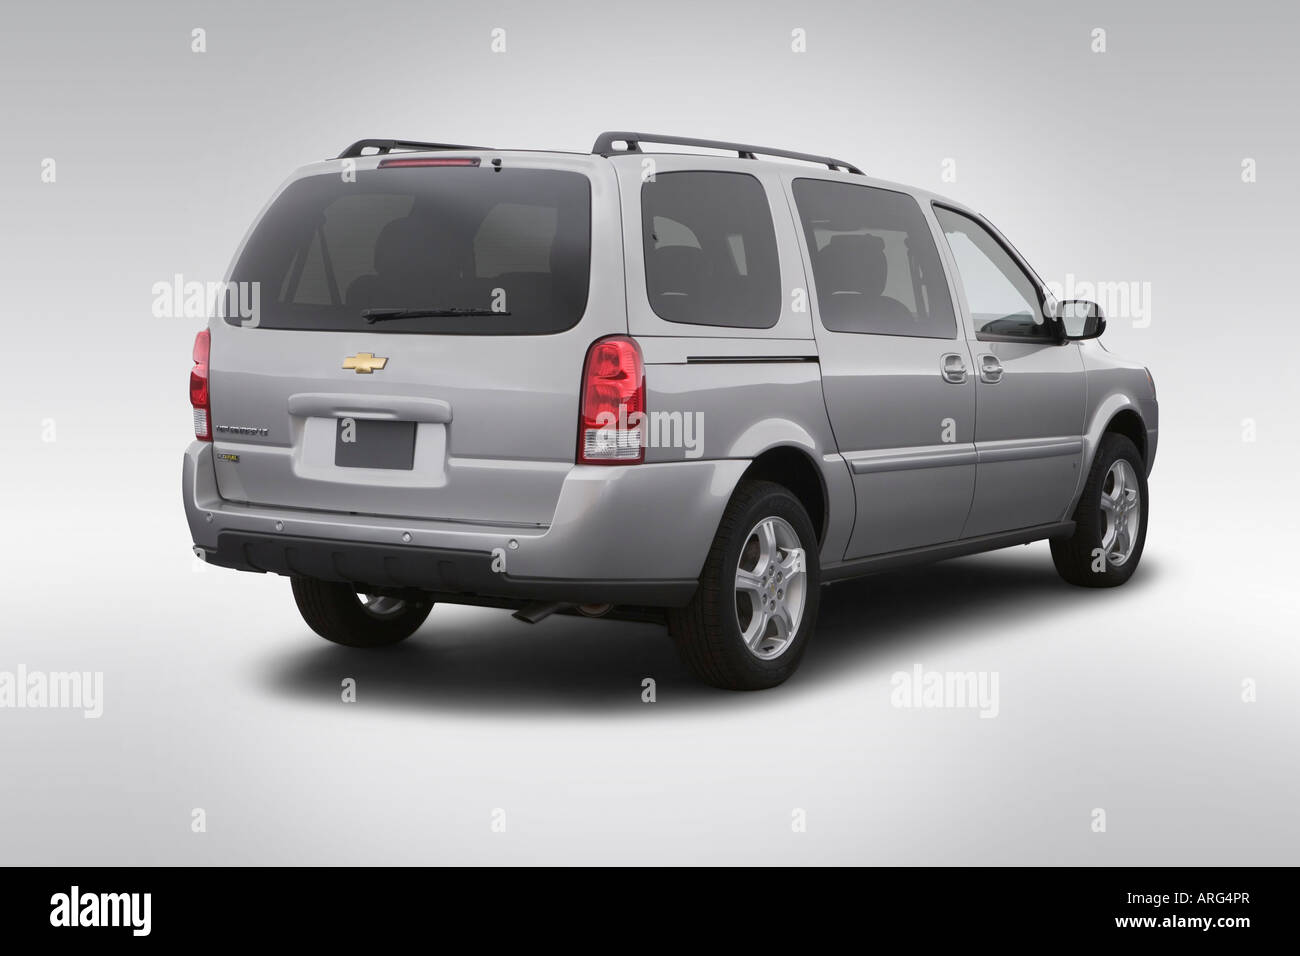 2007 Chevrolet Uplander LT in Silver - Rear angle view Stock Photo - Alamy